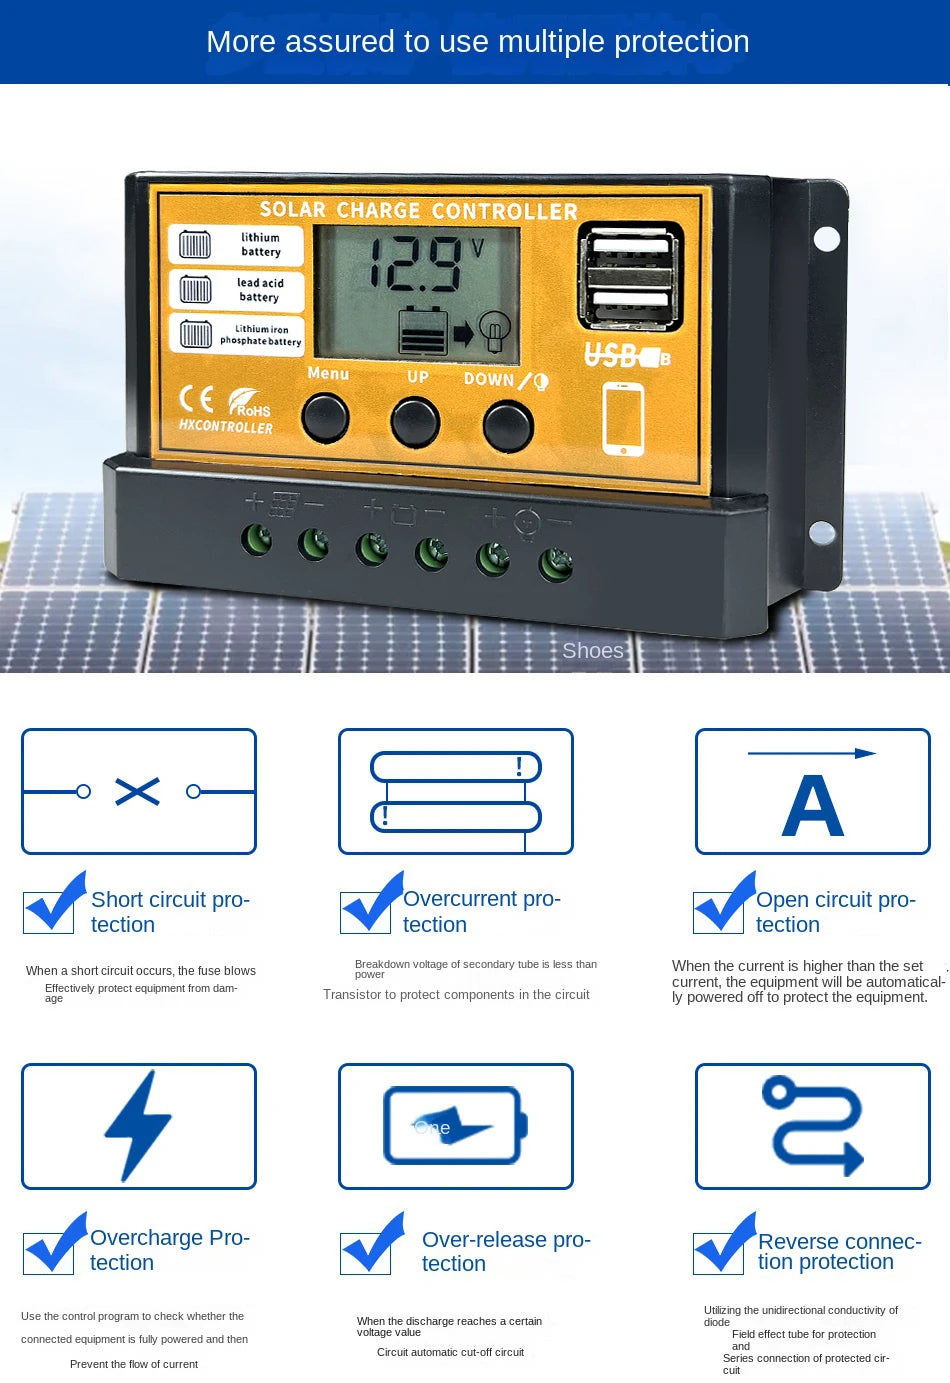 MPPT 720W 480W 360W 240W Solar Charge Controller, Multiprotect MPPT solar charge controller with short circuit, overcurrent, and other protections for safe charging.